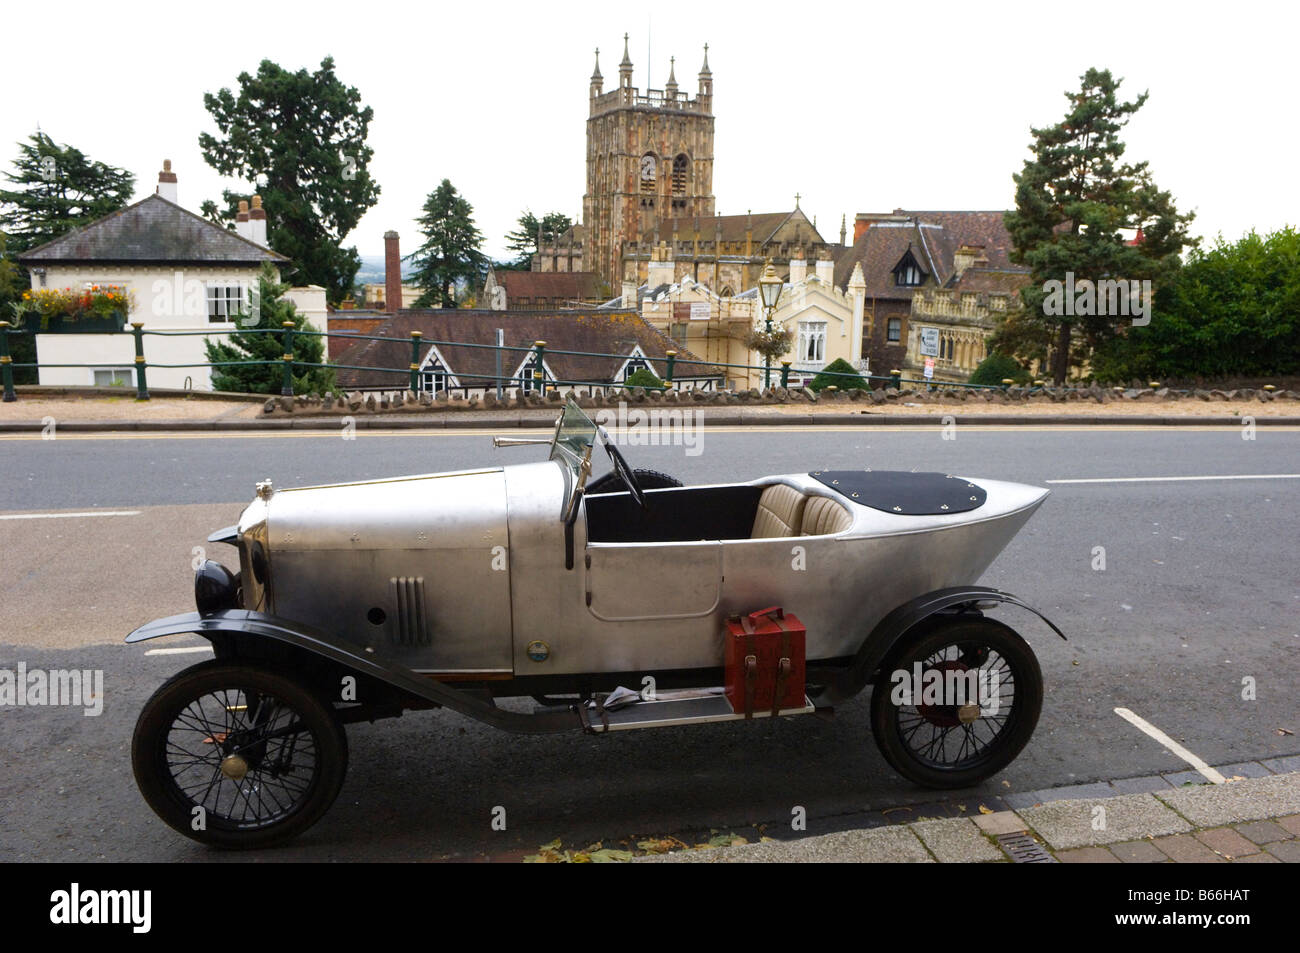 Amilcar is seen against the backdrop of The Priory Malvern Worcestershire Great Britain Europe Stock Photo